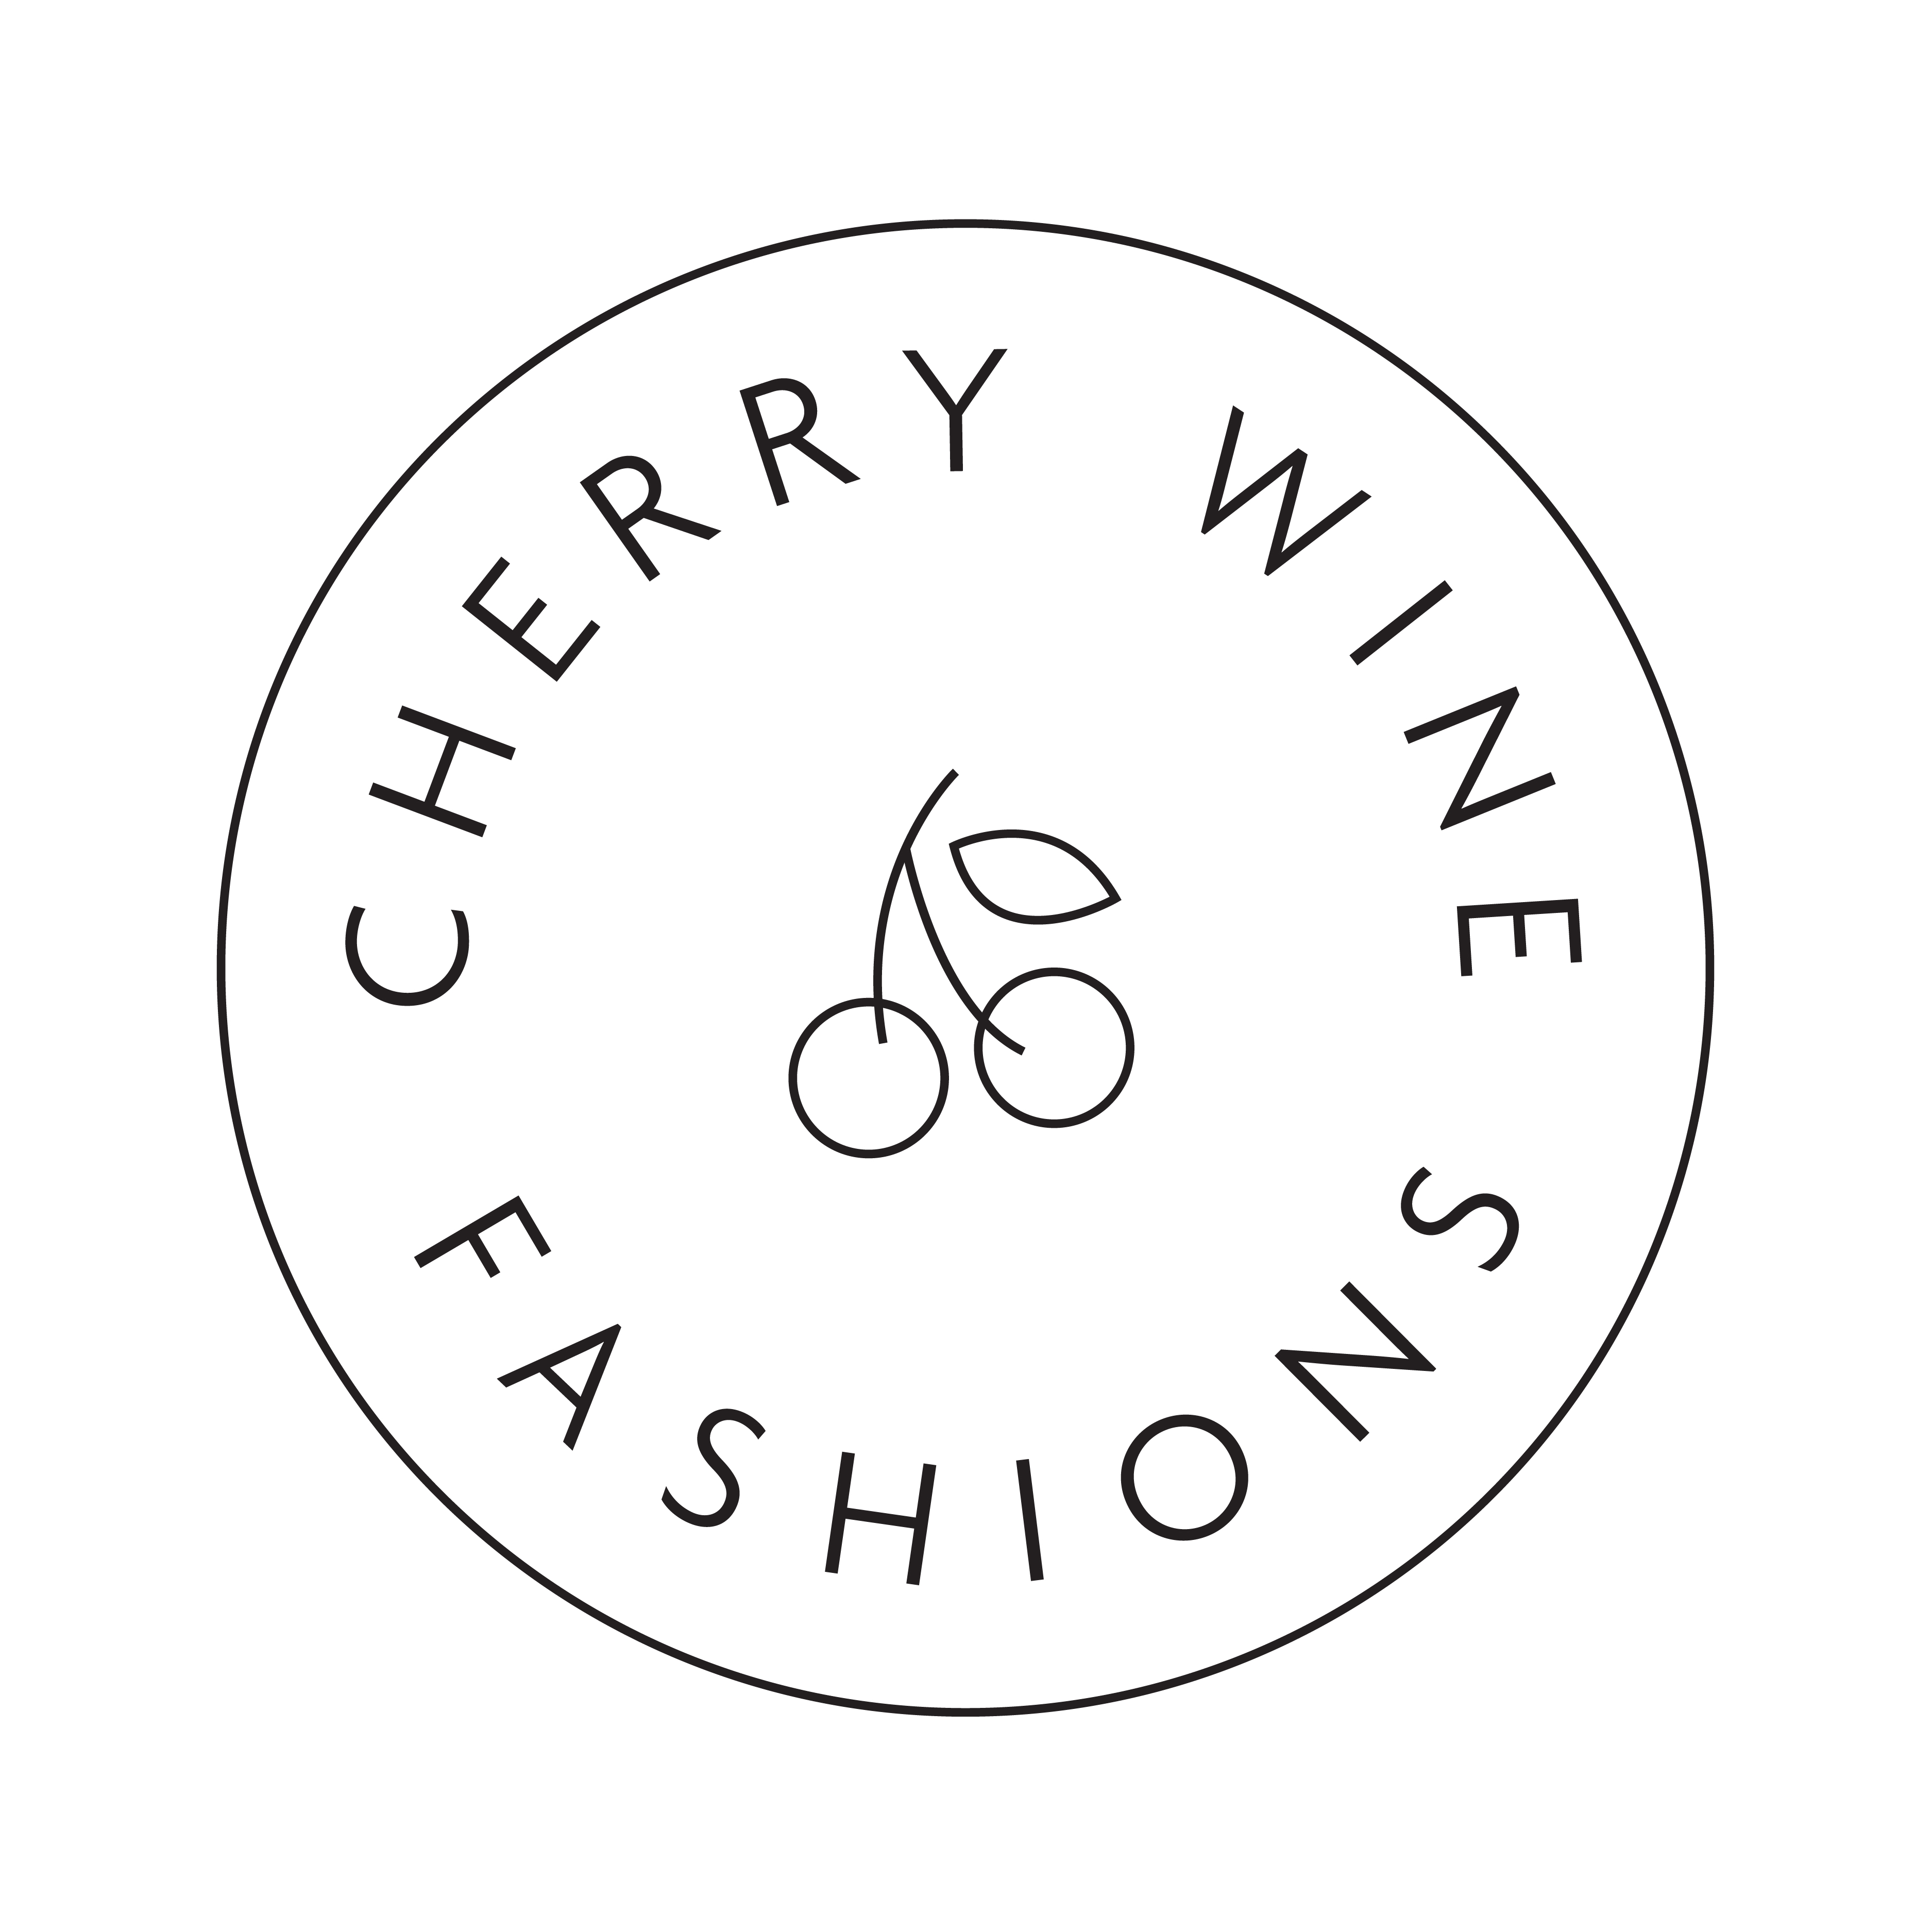 Cherry Wine Fashions logo design by logo designer Caribou Creative for your inspiration and for the worlds largest logo competition